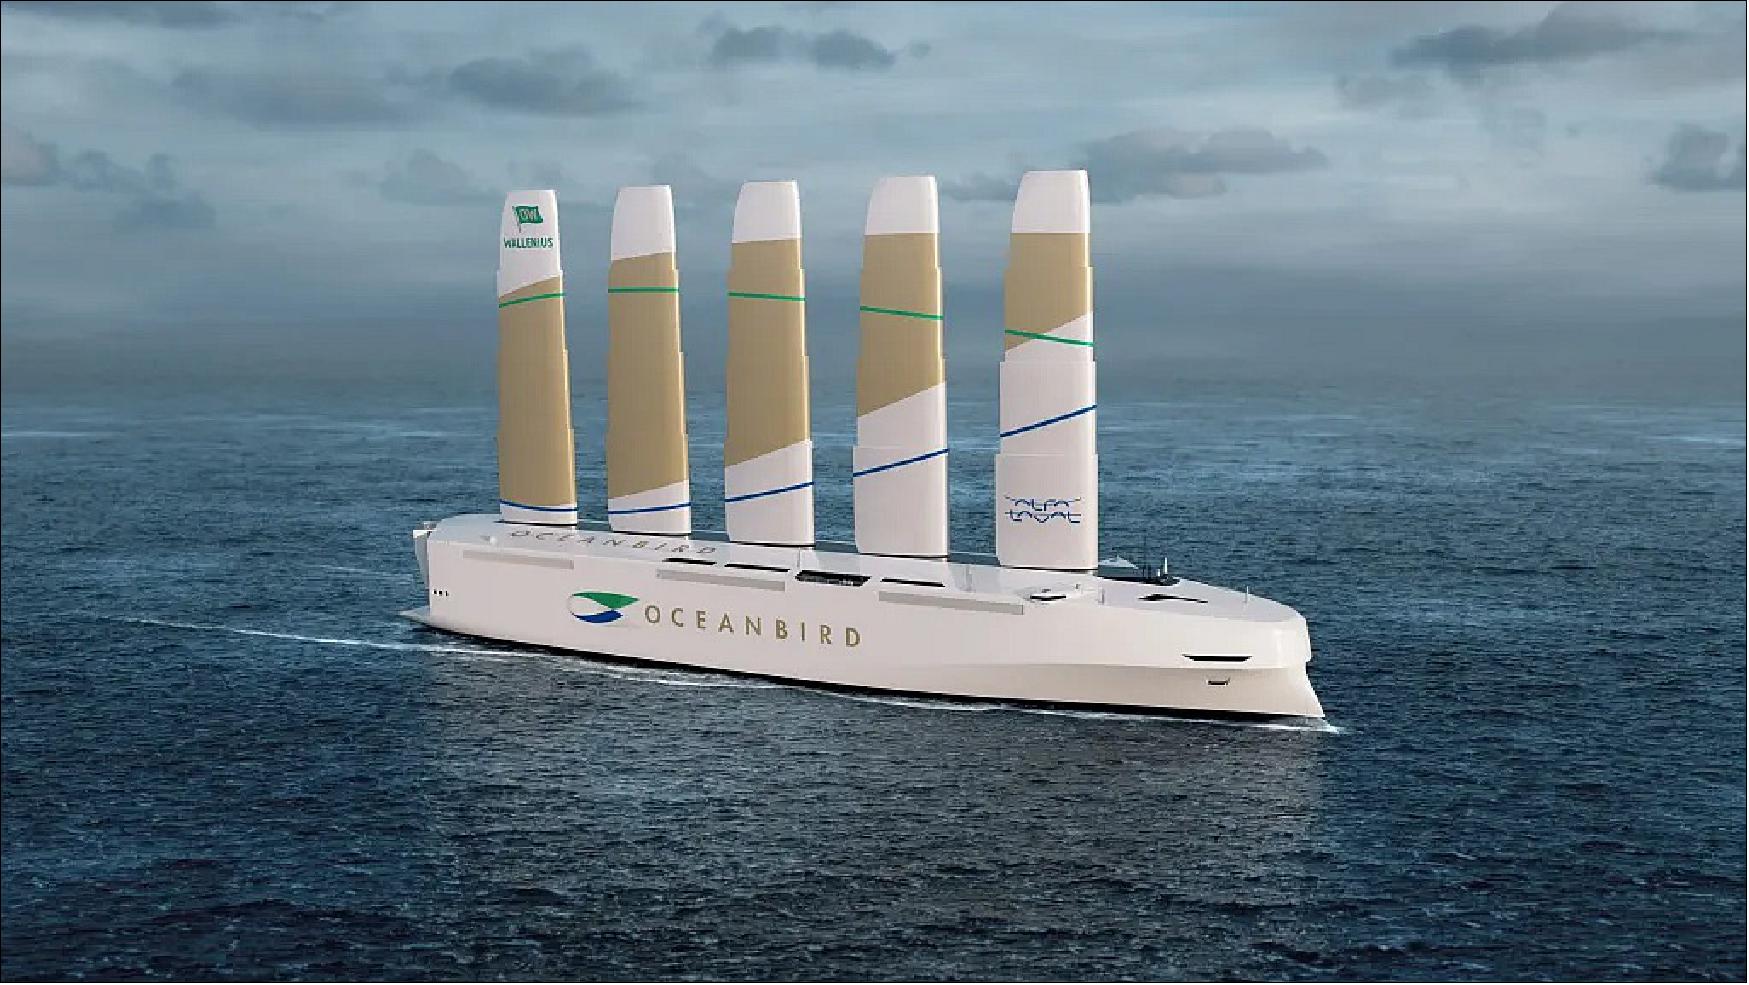 Figure 117: Oceanbird will take wind power solutions from a cutting-edge marine concept to commercial reality (image credit: Alfa Laval, Wallenius)